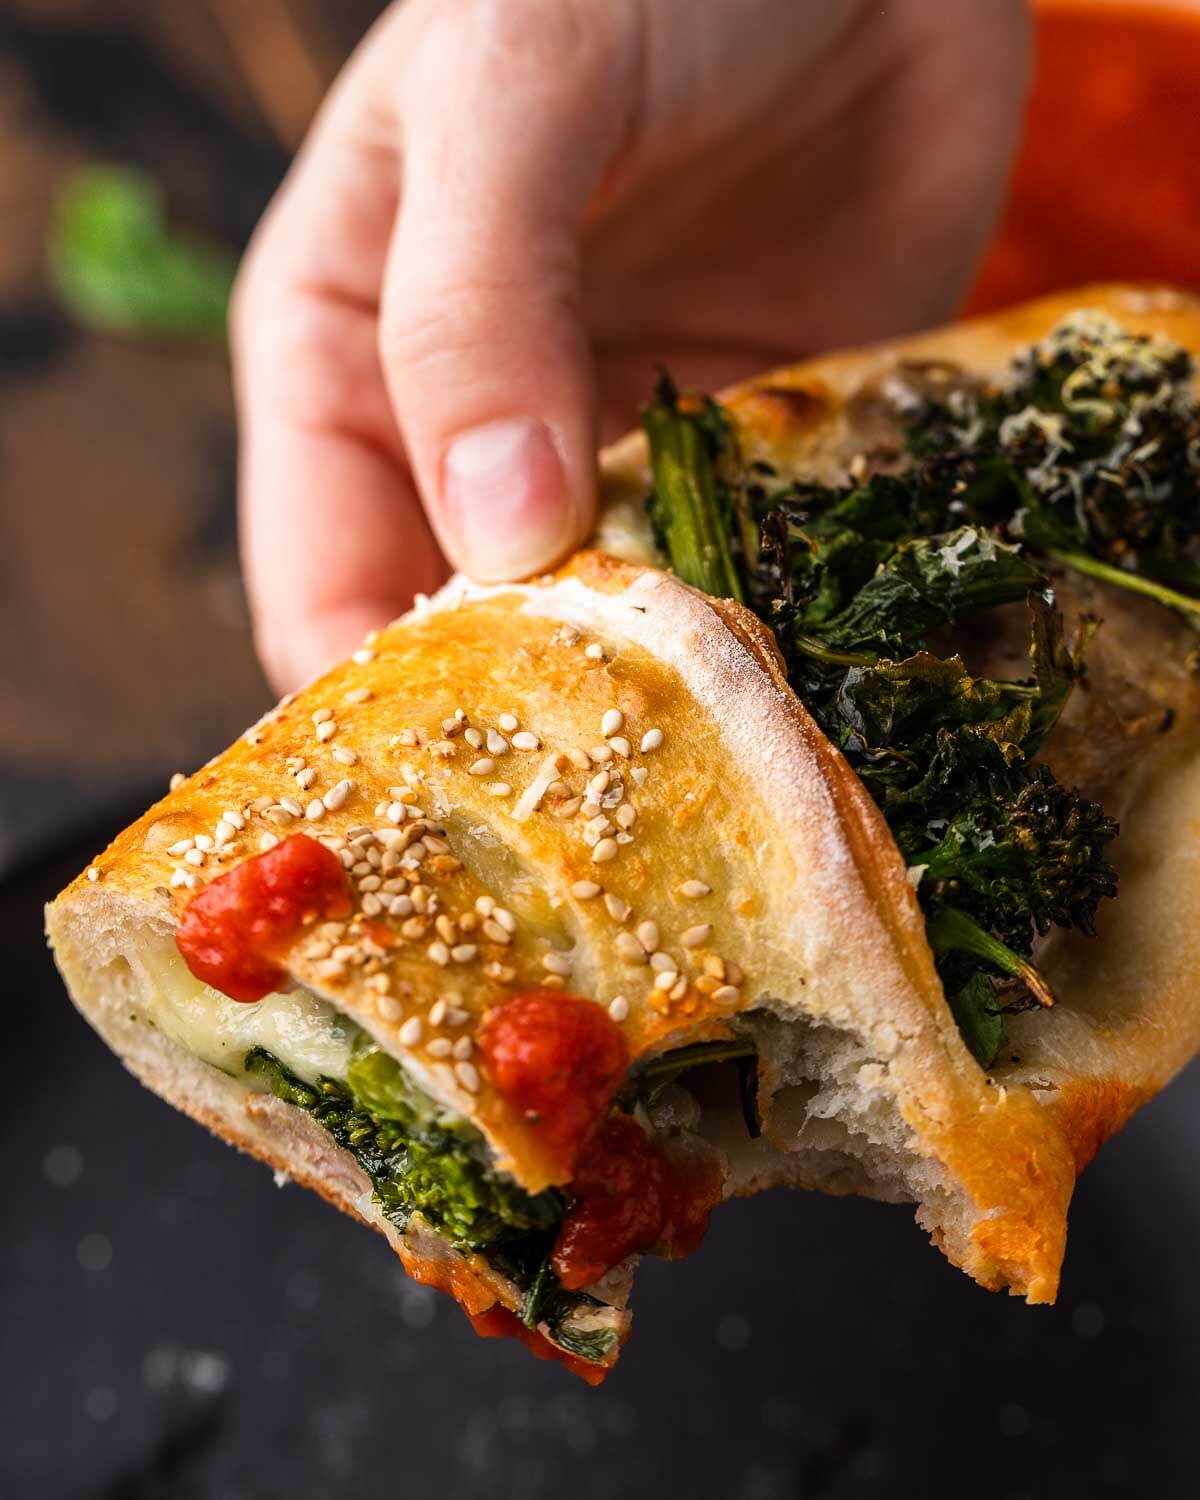 Hands holding sausage broccoli rabe roll dipped in sauce.